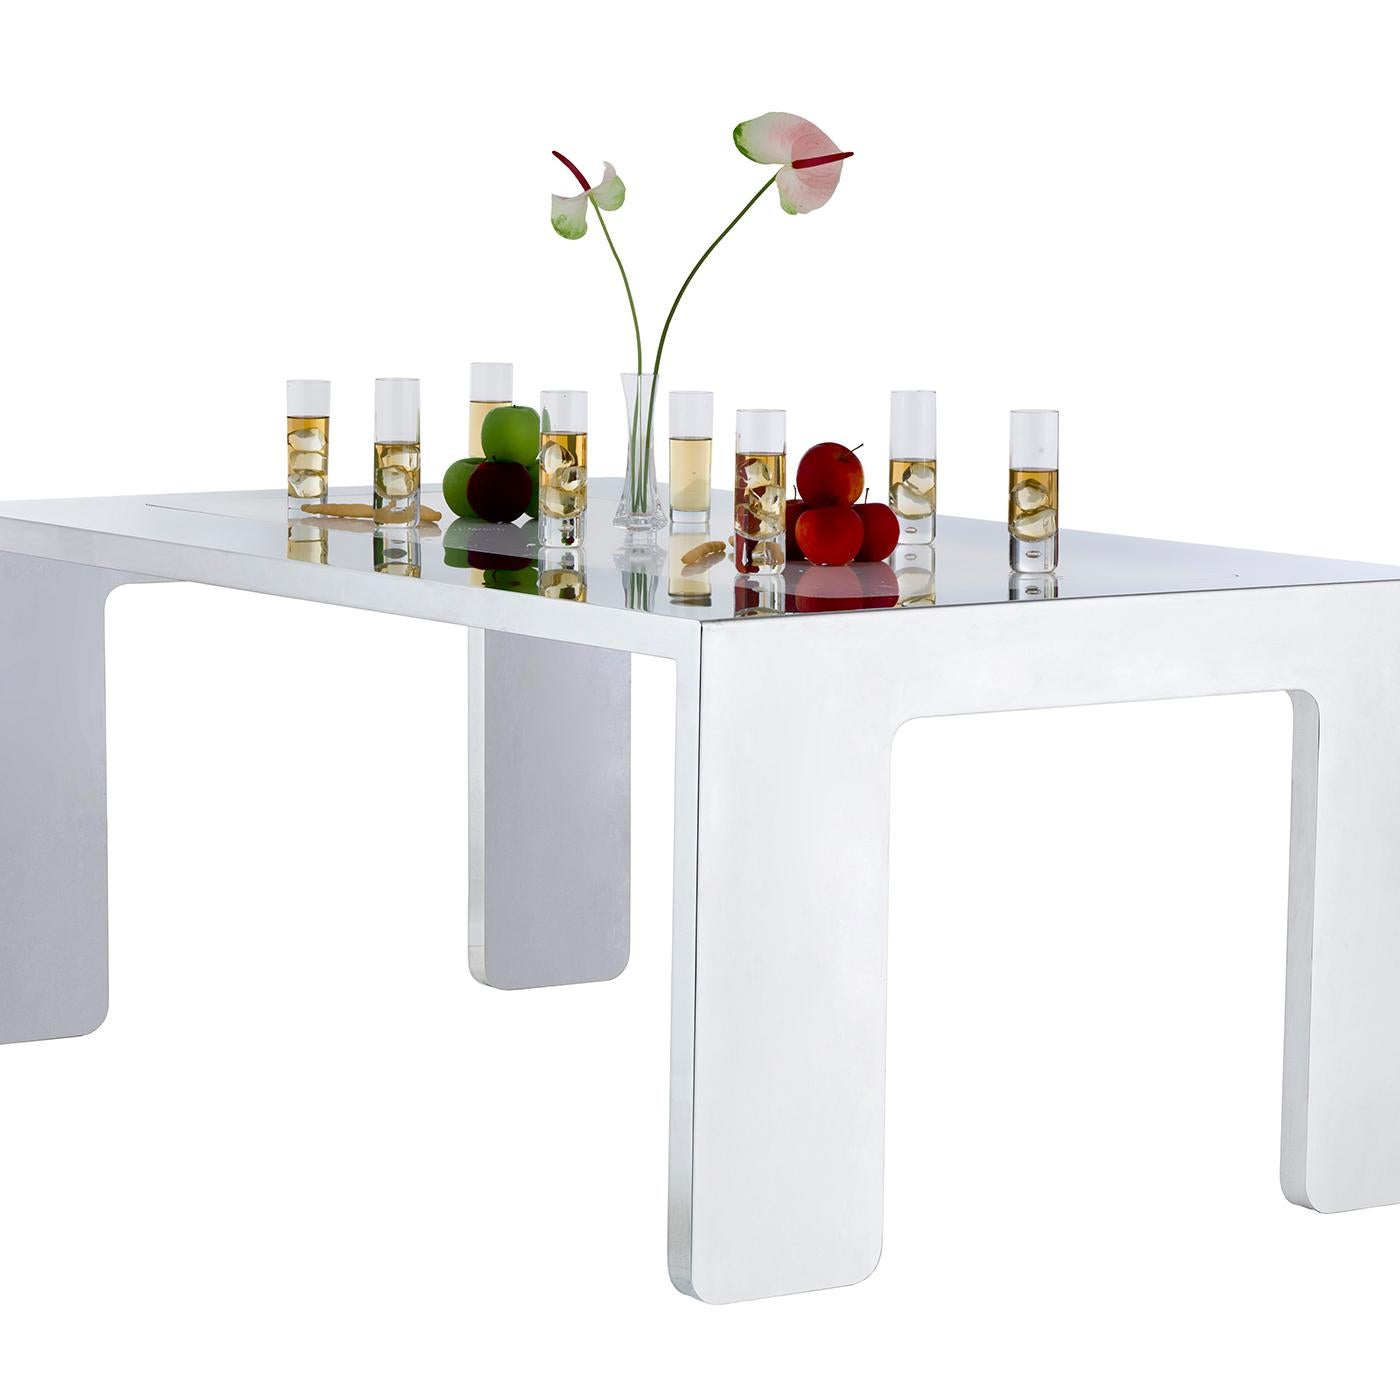 The sharp-lined and essential design of this rectangular table combine the strength of the mirror-finished stainless steel bold legs with the smooth elegance of the white marble top. This exclusive table by Giancarlo Pretazzoli will comfortably sit